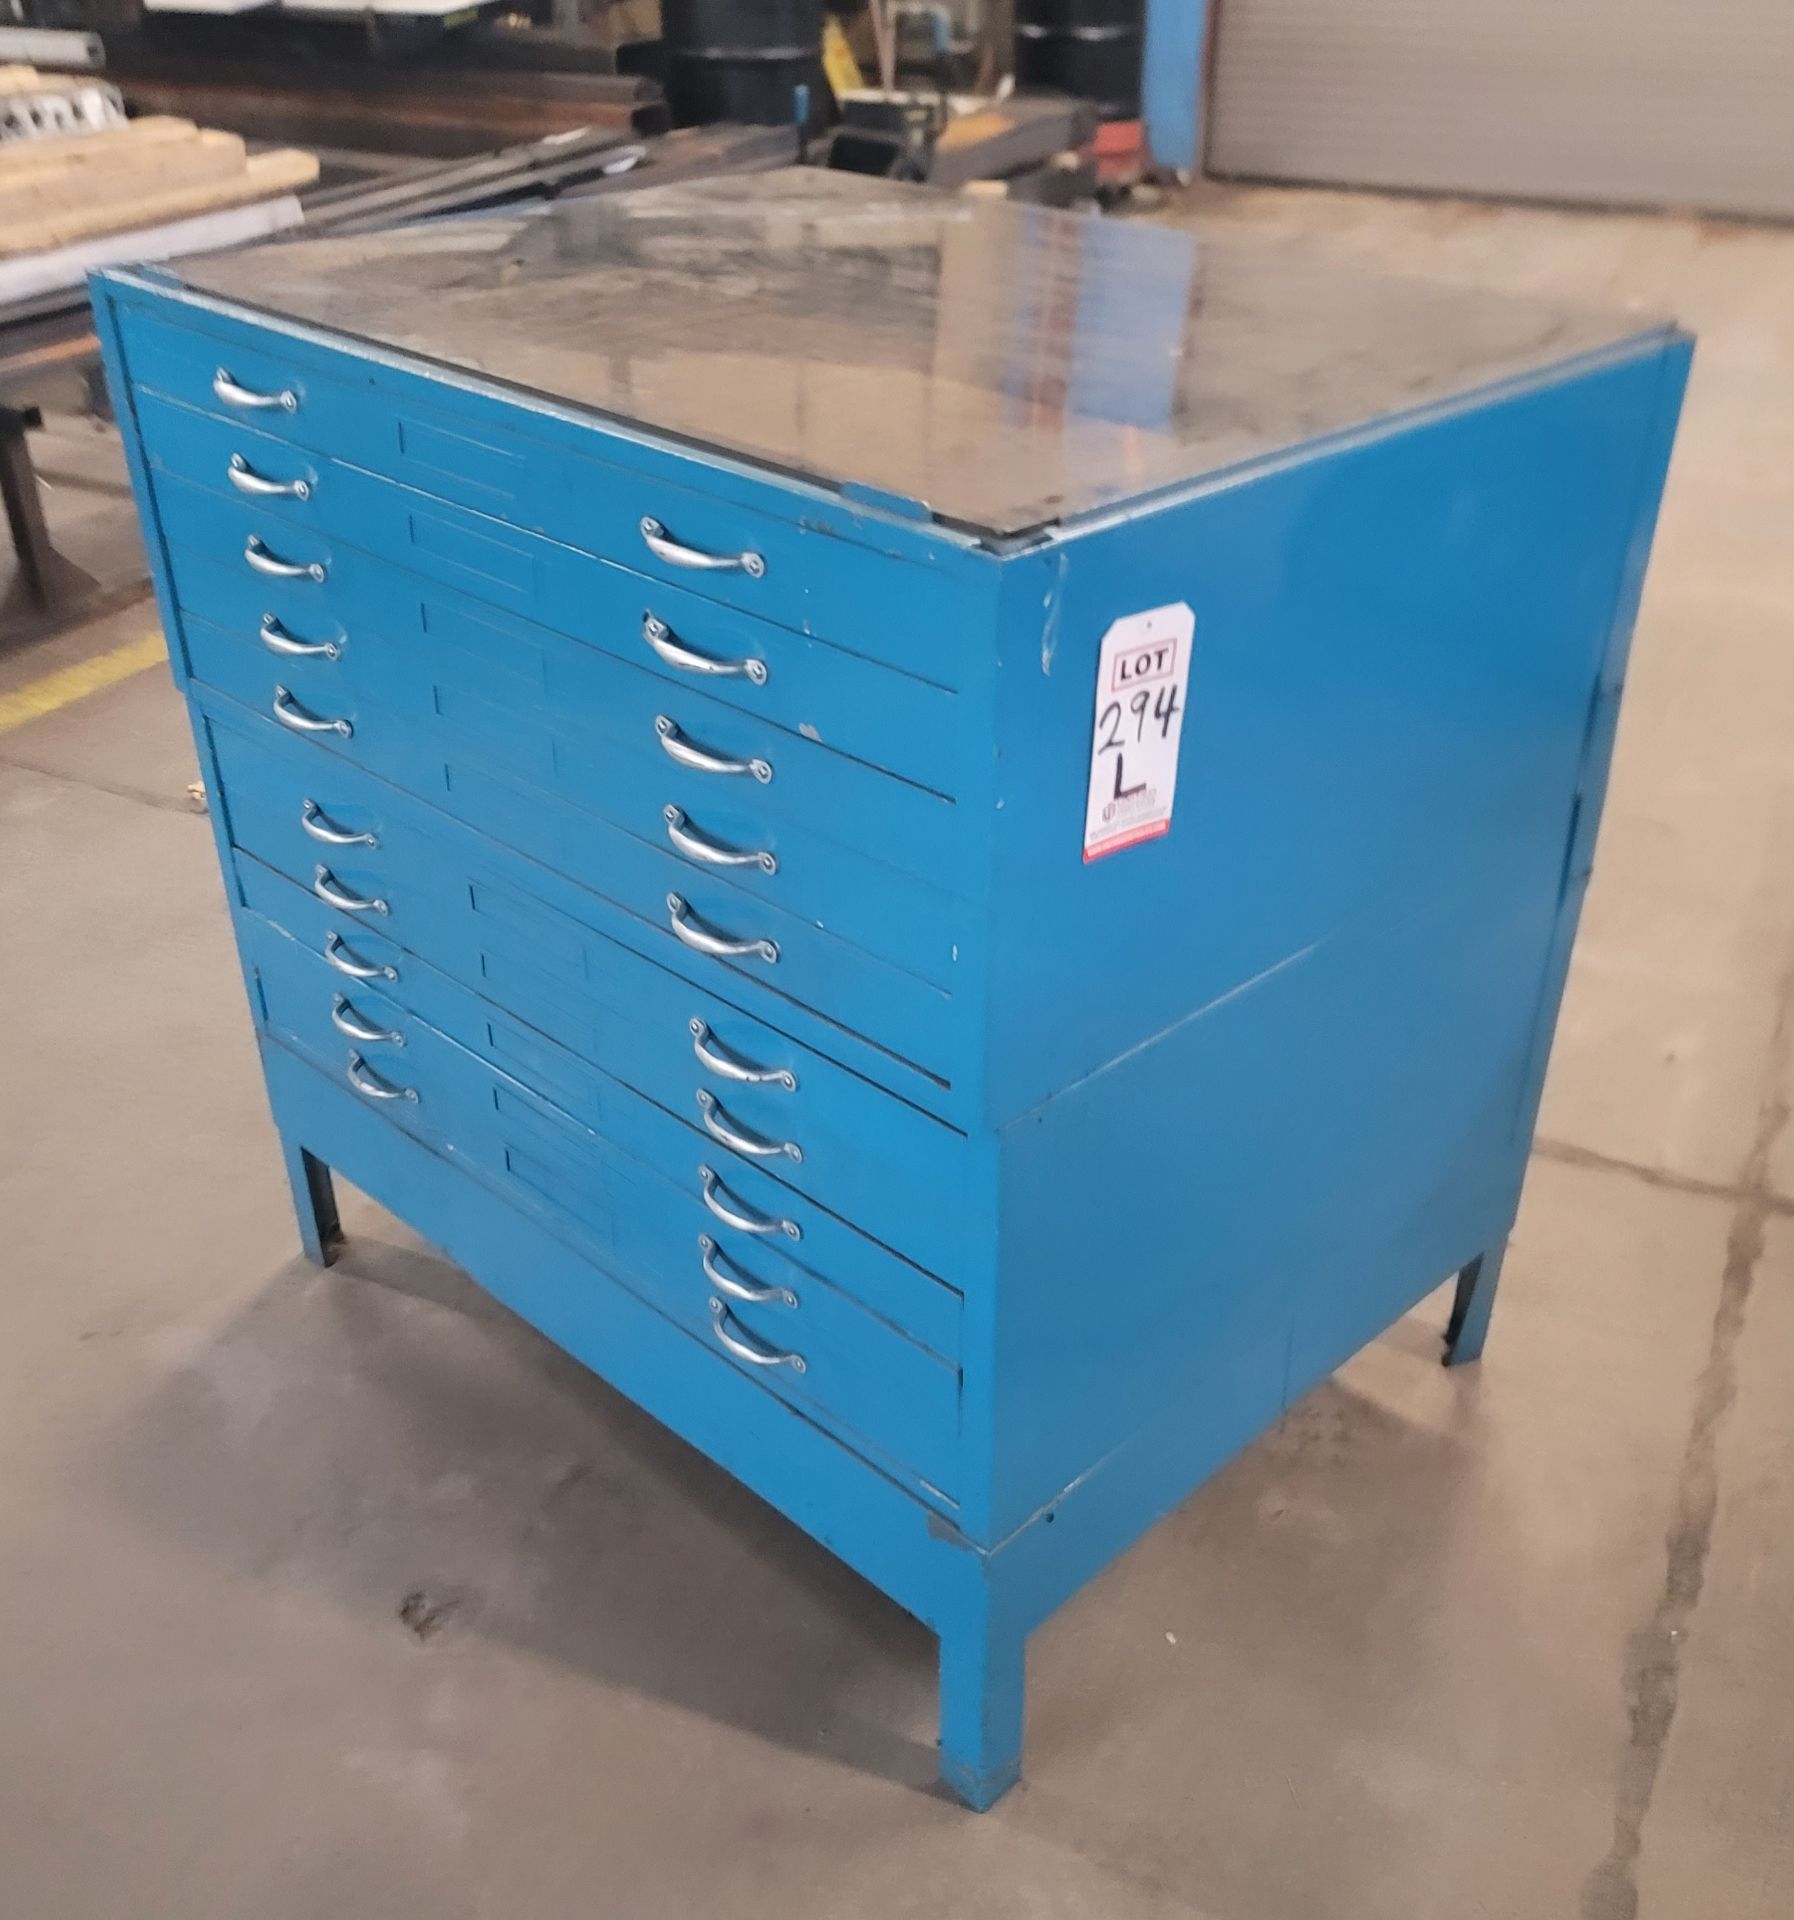 10-DRAWER TOOLING CABINET, 43" X 33" X 43" HT, CONTENTS NOT INCLUDED